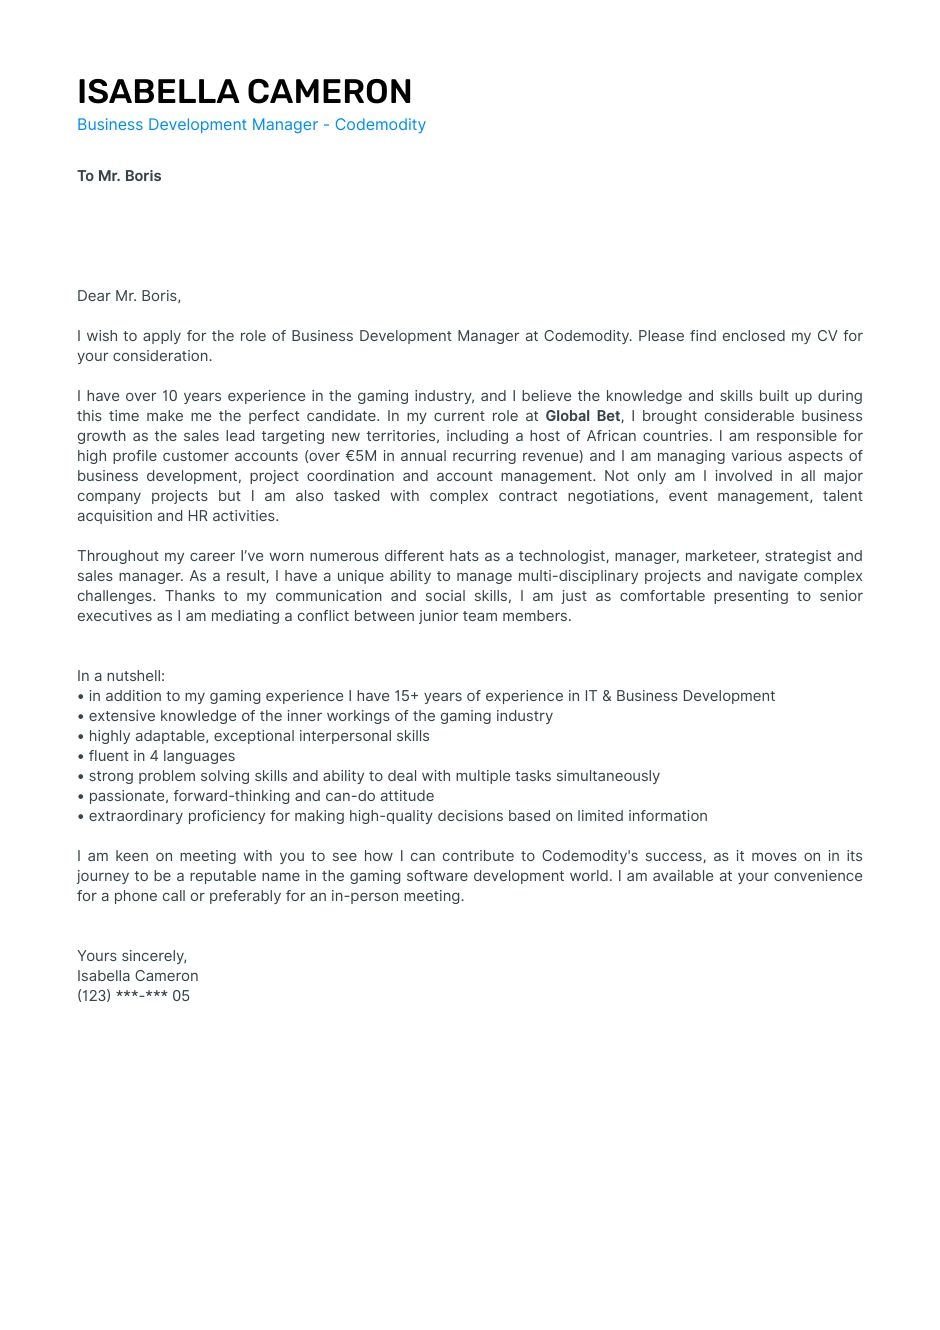 business-development-manager-coverletter.png